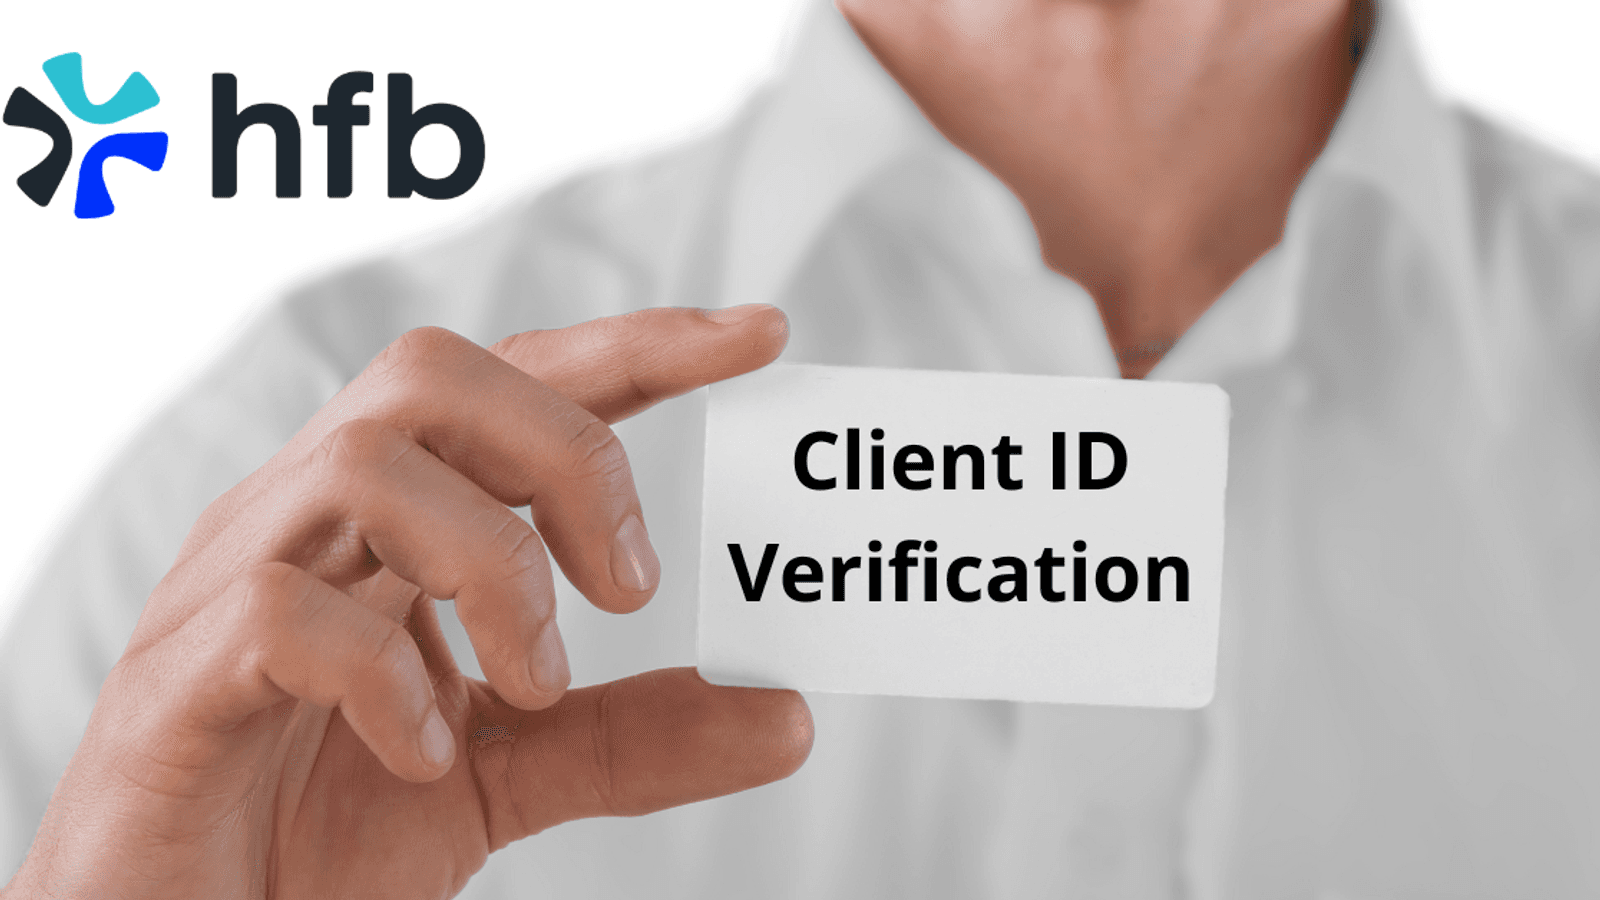 Cover image from HFB Client ID Verification